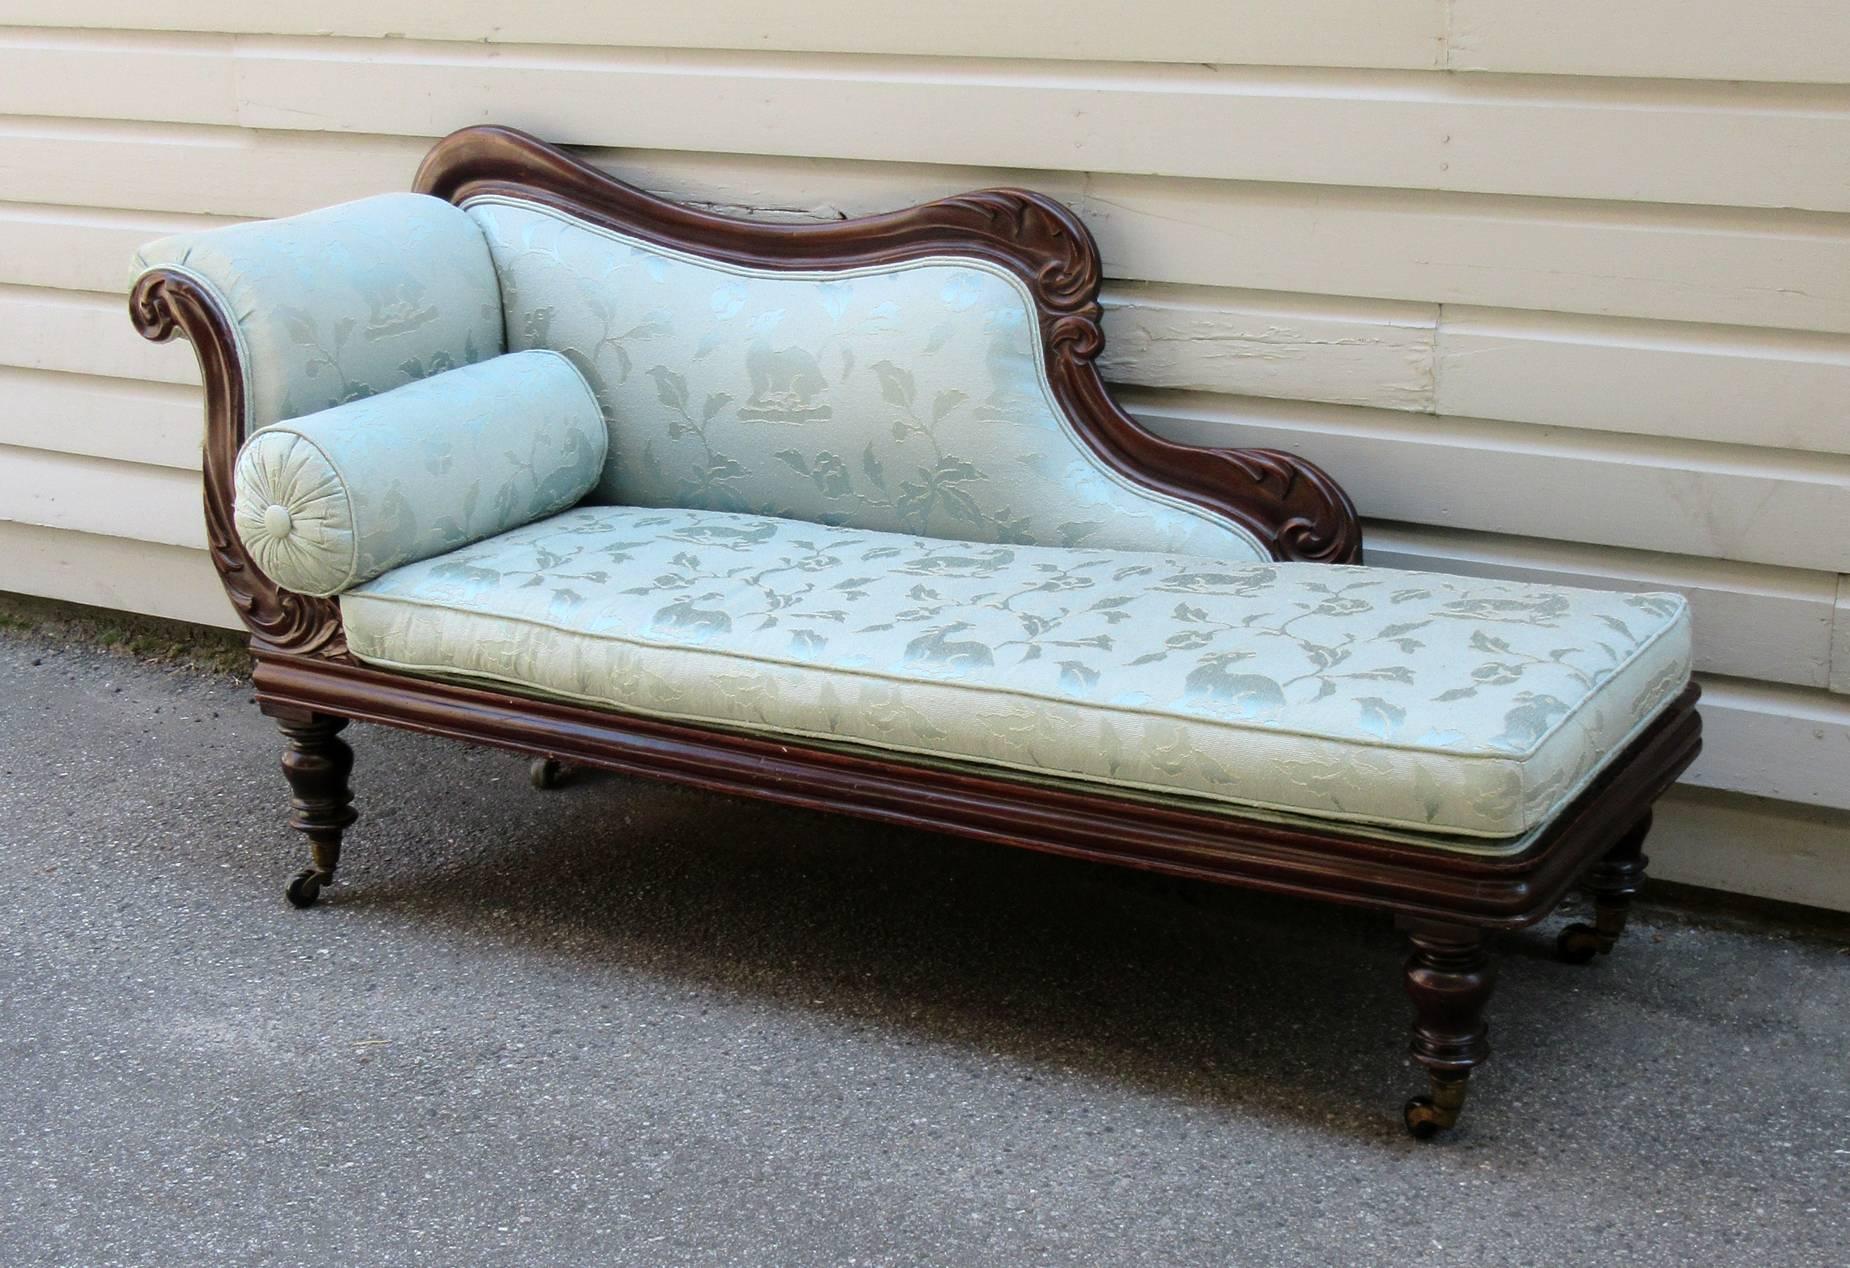 Upholstery 19th Century West Indies Jamaican Regency Mahogany Upholstered Recamier For Sale